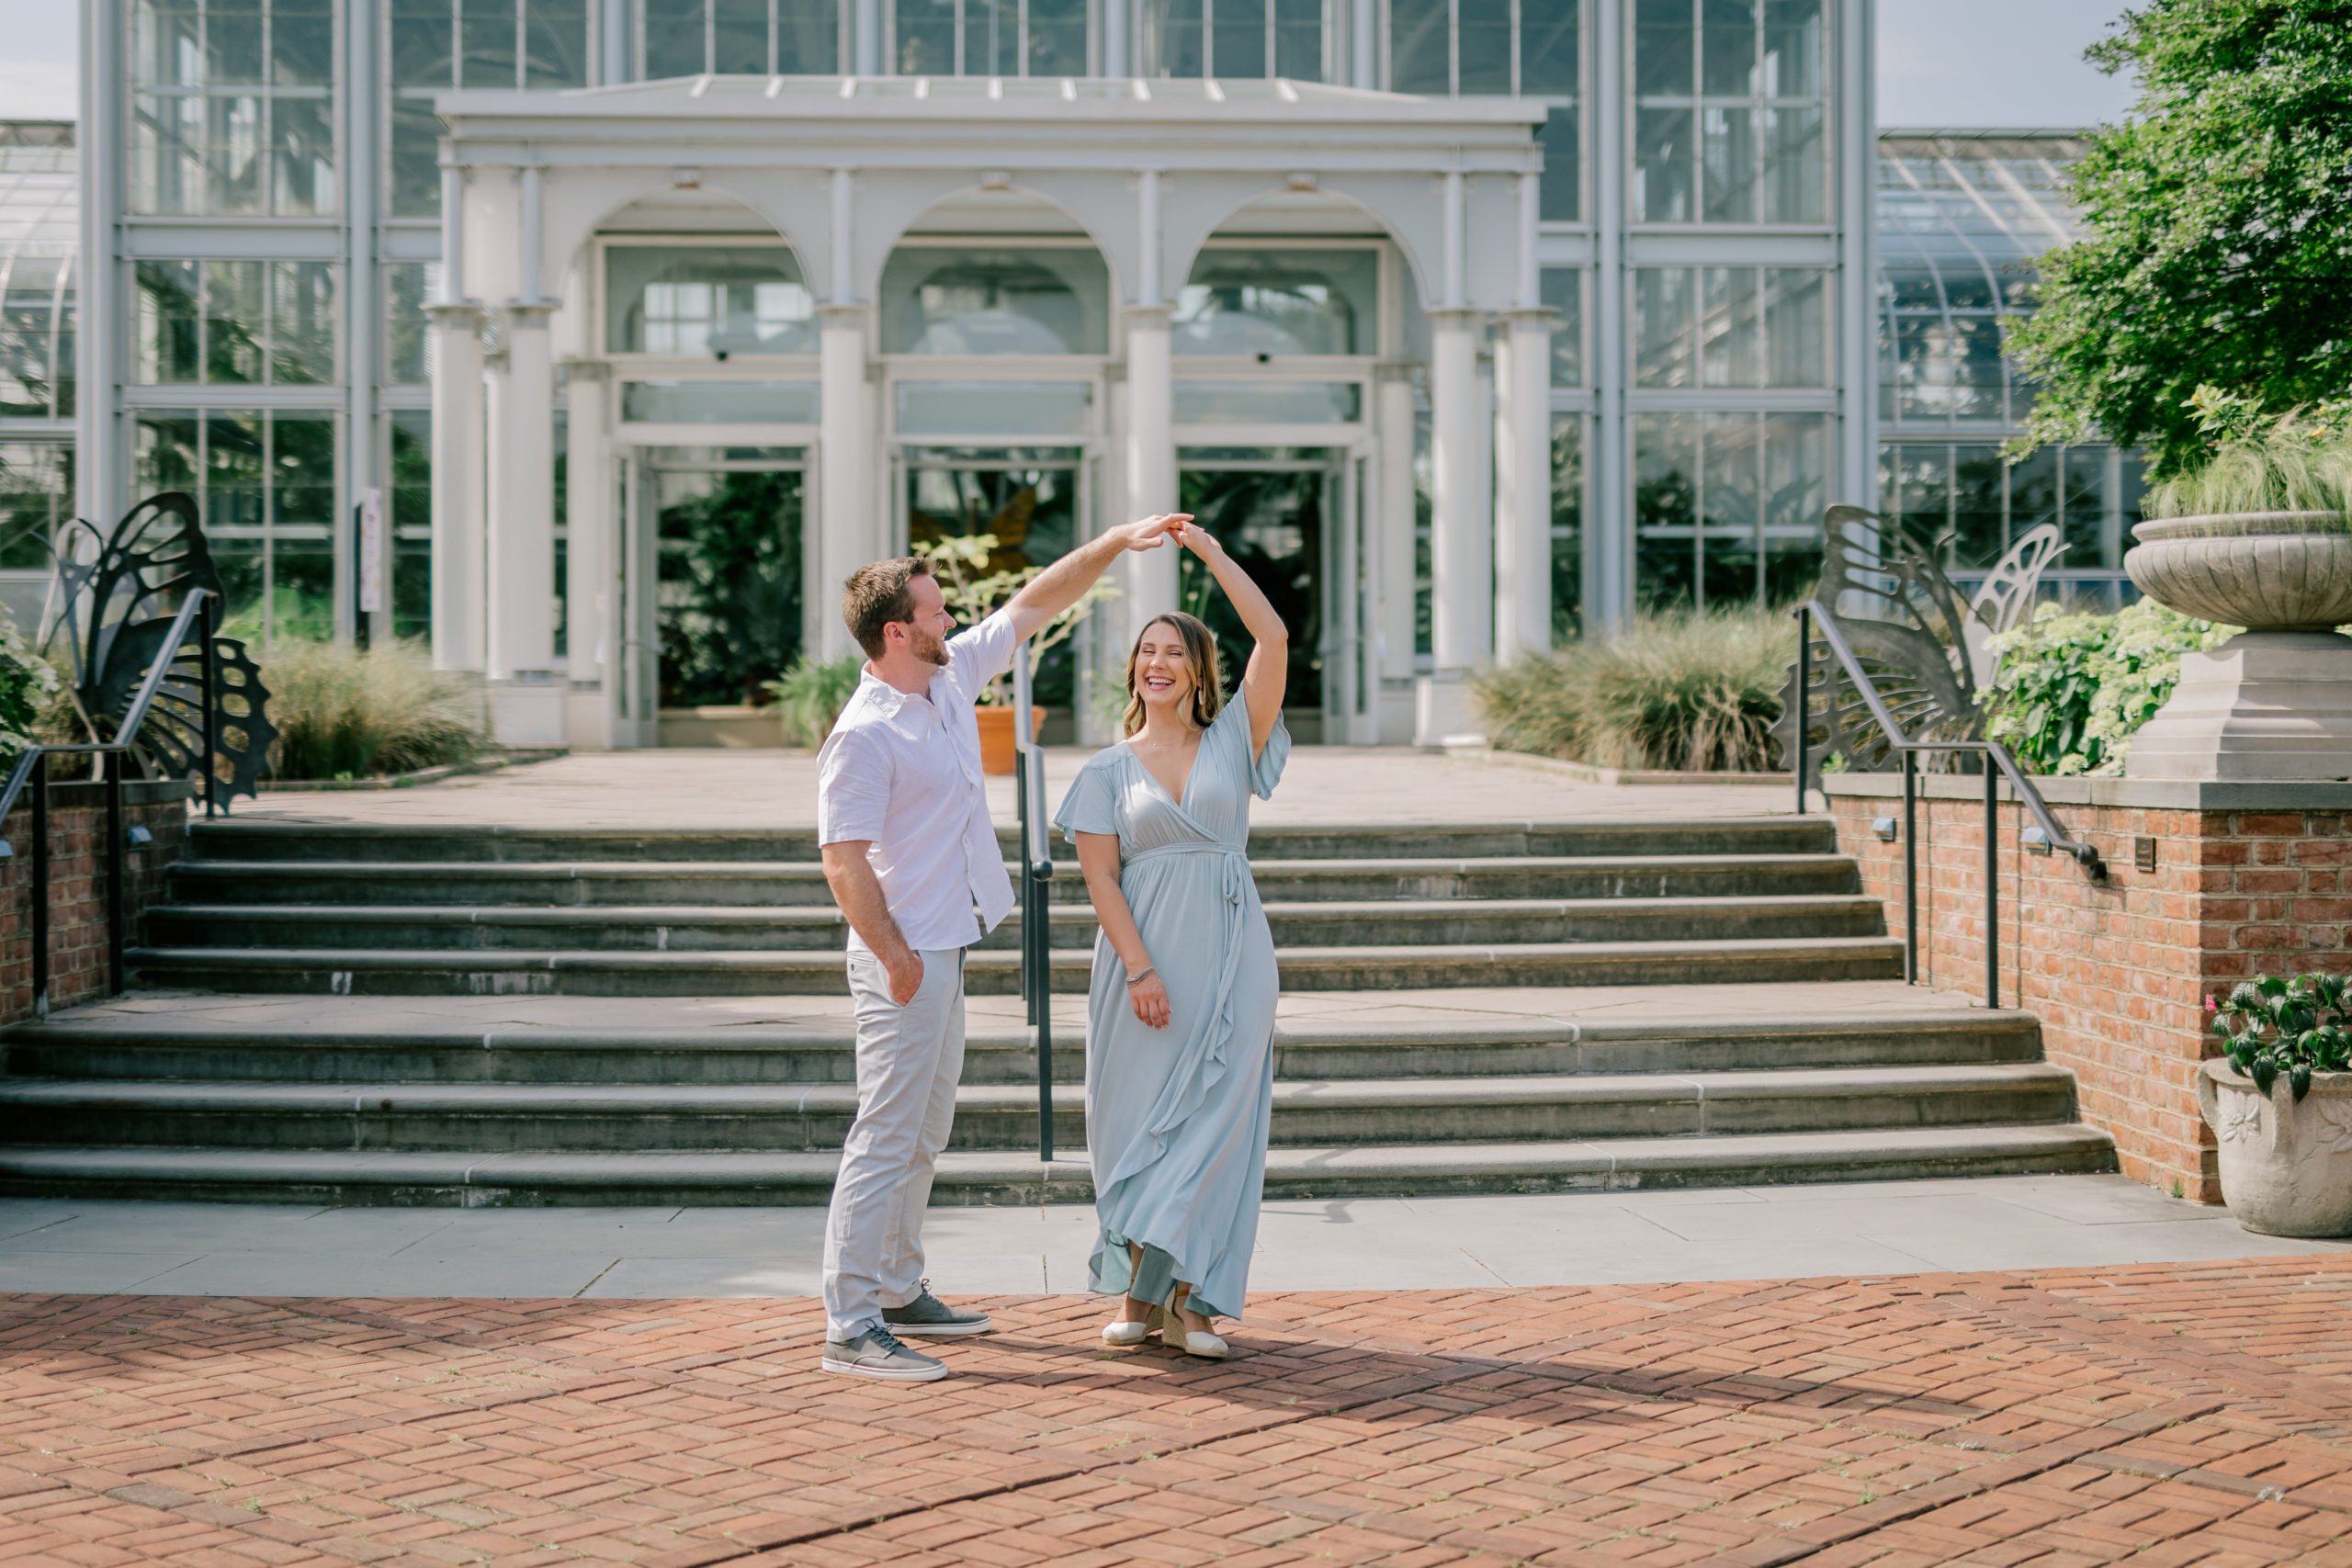 Couple dancing in front of conservatory - Lewis Ginter Botanical Garden Engagement Session - Garden Engagement Session